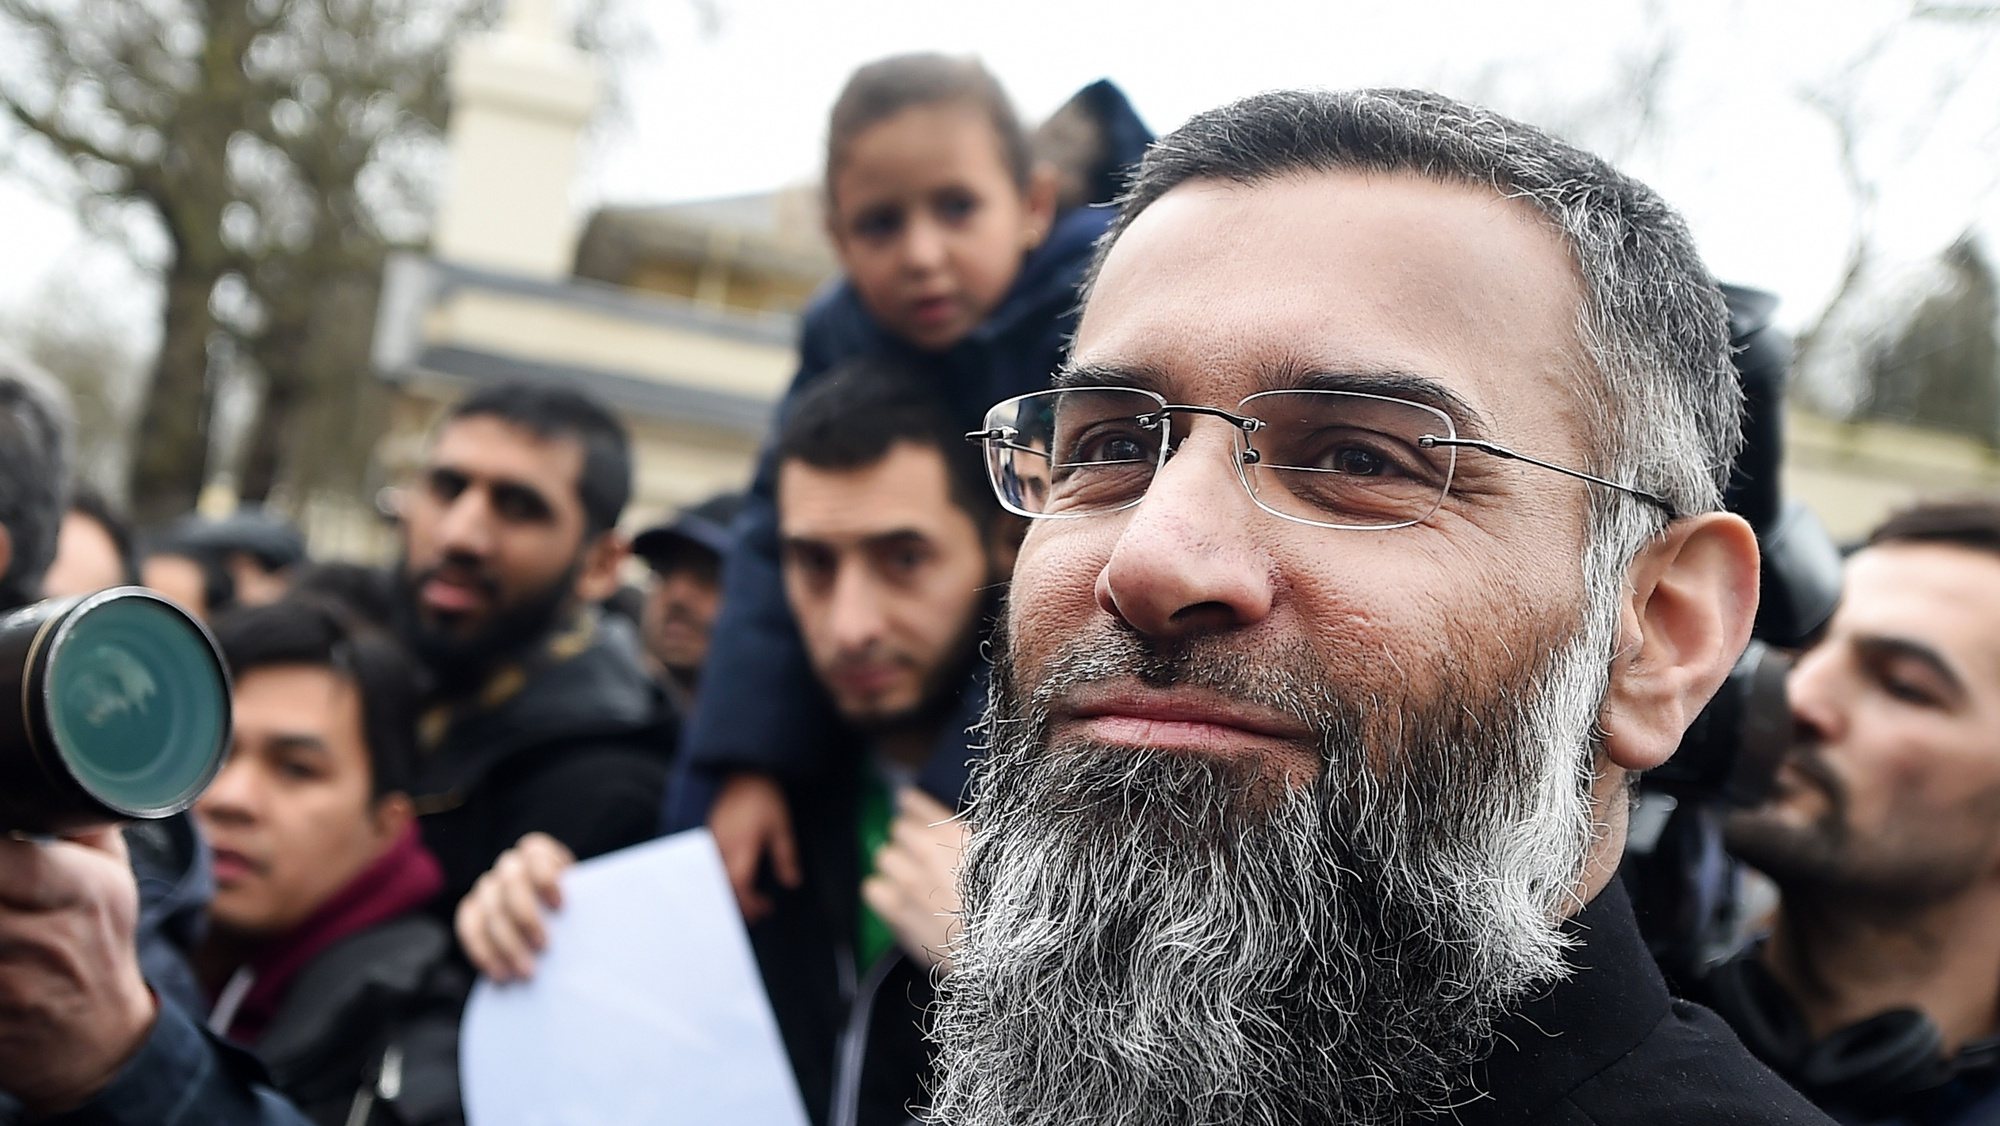 epa07104279 (FILE) - Radical preacher, Anjem Choudary holding a rally for muslims outside Regents Park mosque in London, Britain, 03 April 2015, (reissued 19 October 2018). Media reports state on 19 October 2018 that Anjem Choudary has been released from Belmarsh prison in south-east London after serving just half of his five-and-a-half-year sentence. Choudary was convicted in 2016 of urging people to support the terror group, Islamic State (IS).  EPA/ANDY RAIN *** Local Caption *** 52963964